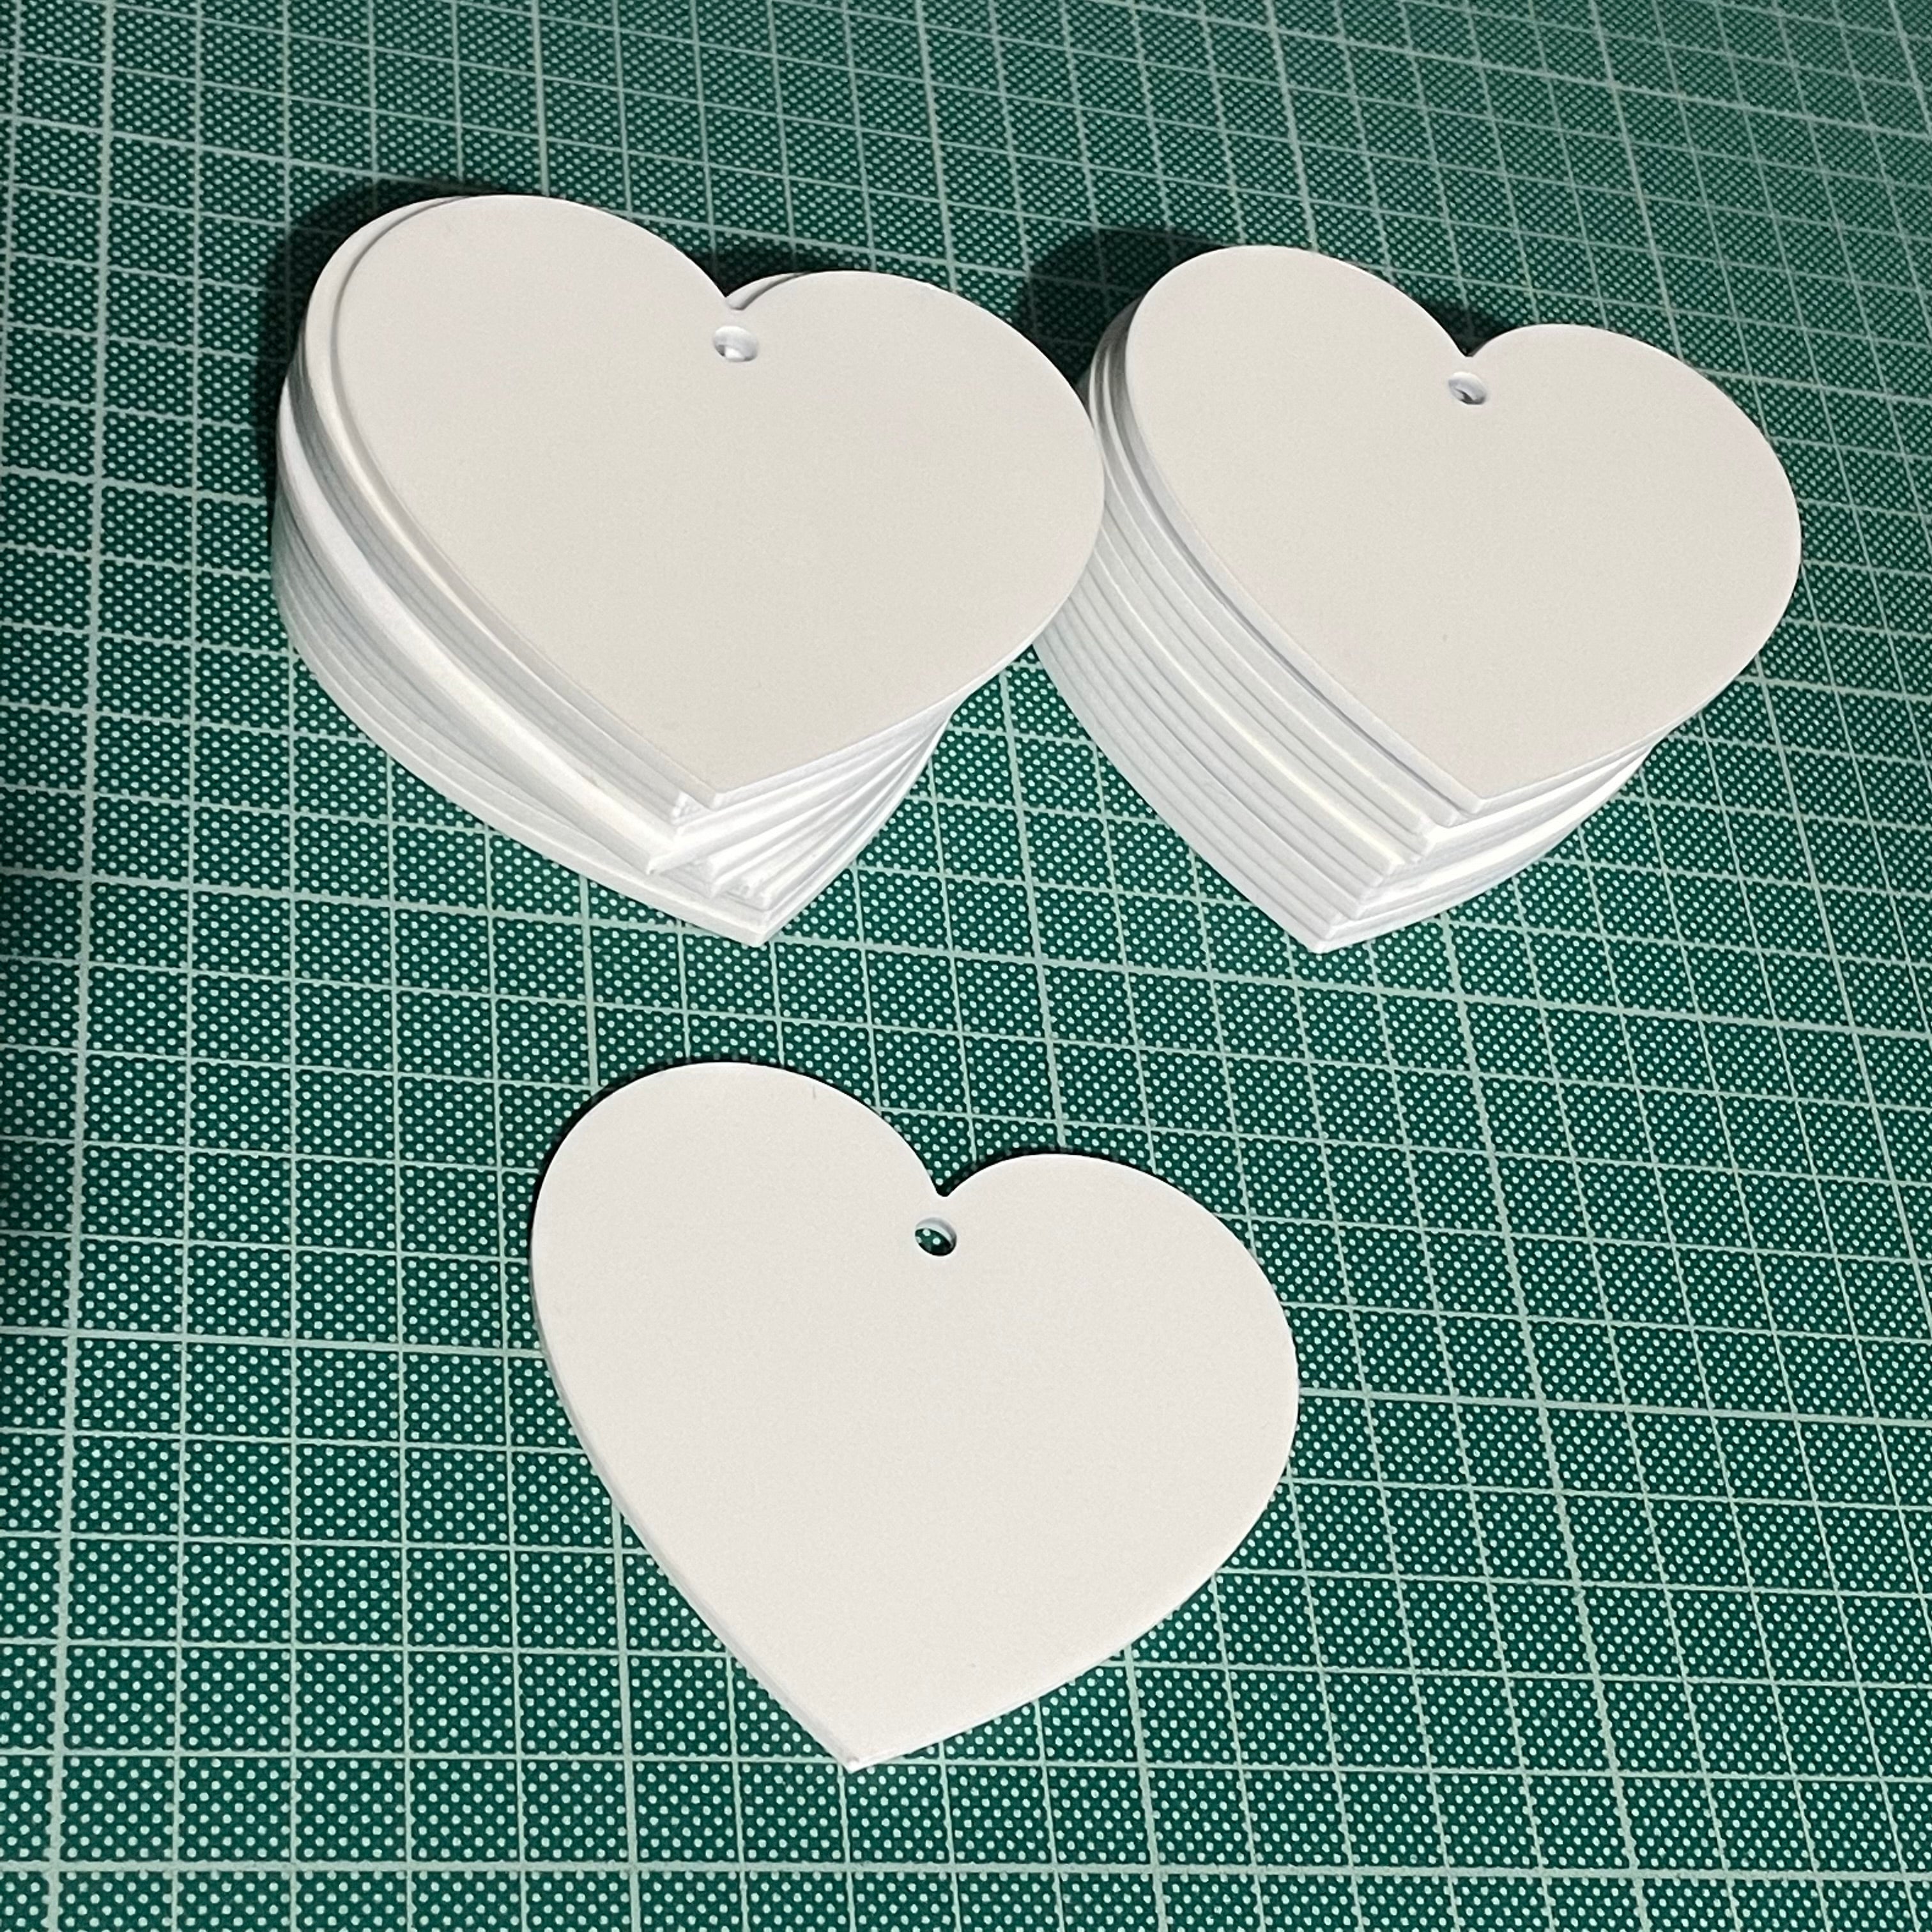 Printing Jig for 80mm Heart Blanks - Roland BD-8 Flatbed Printer (2 Spaces)